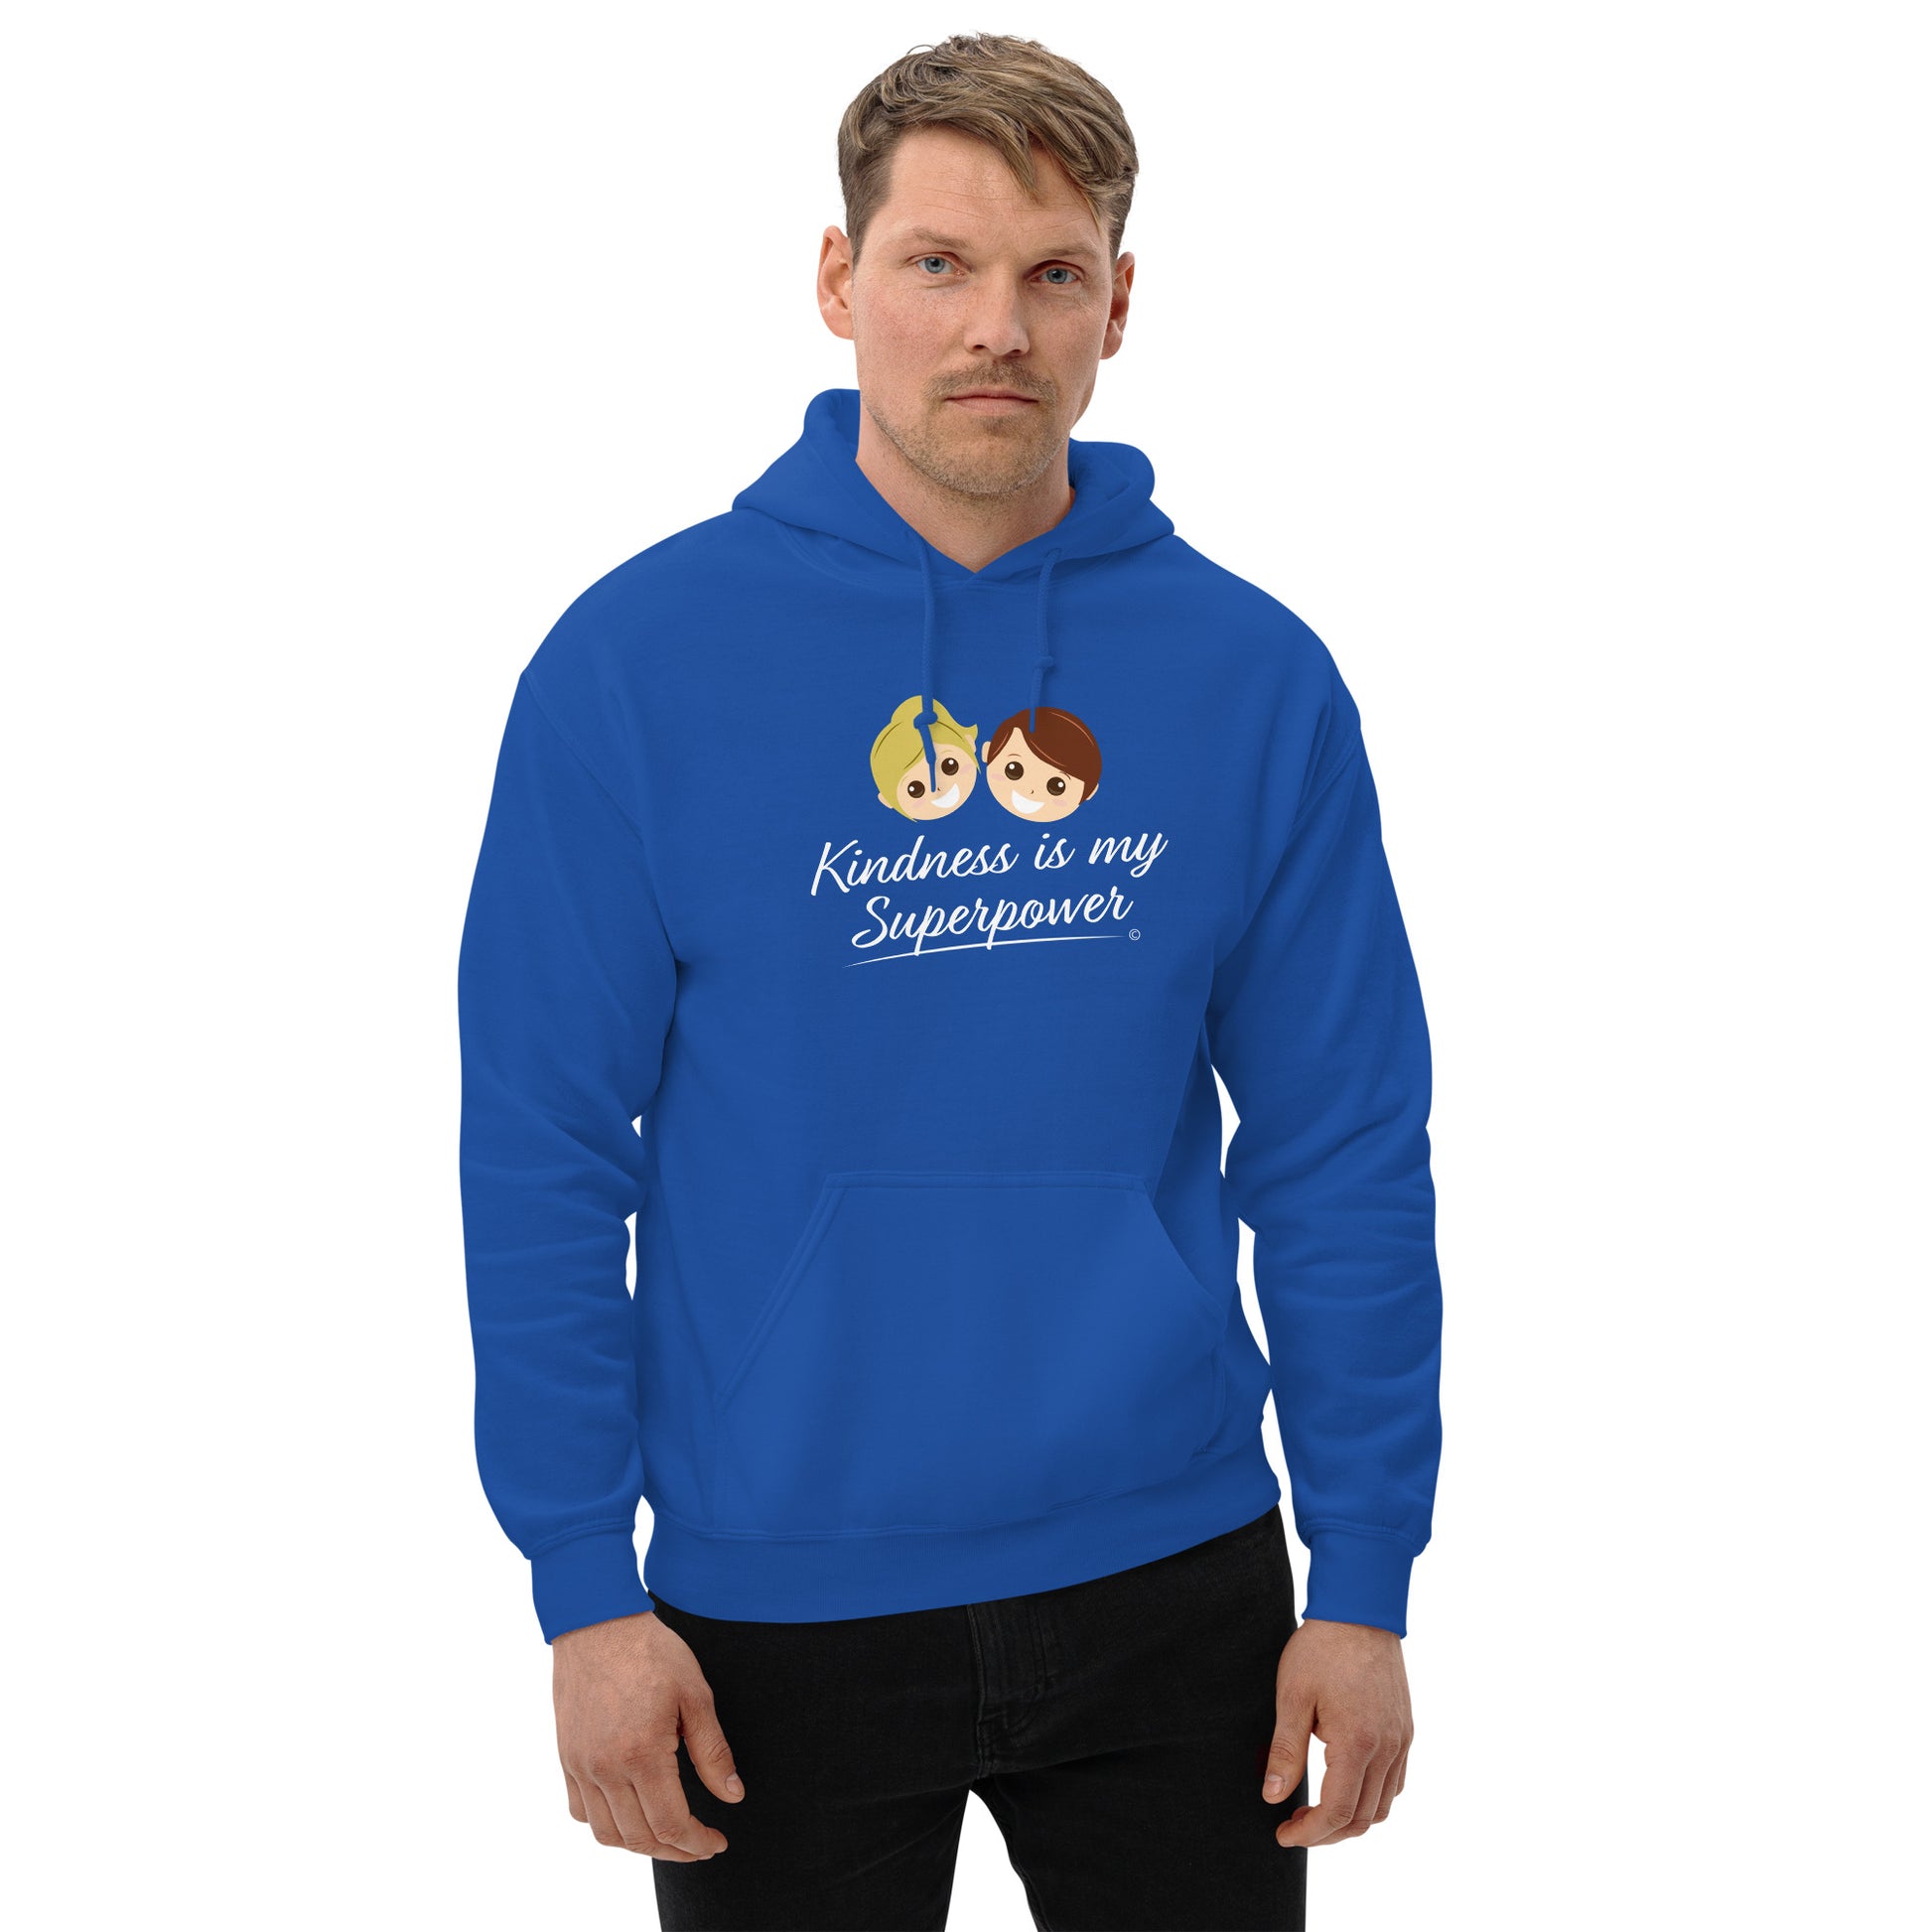 A confident man showcasing a comfortable unisex hoodie in royal blue, featuring the uplifting quote 'Kindness is my Superpower' in bold lettering.